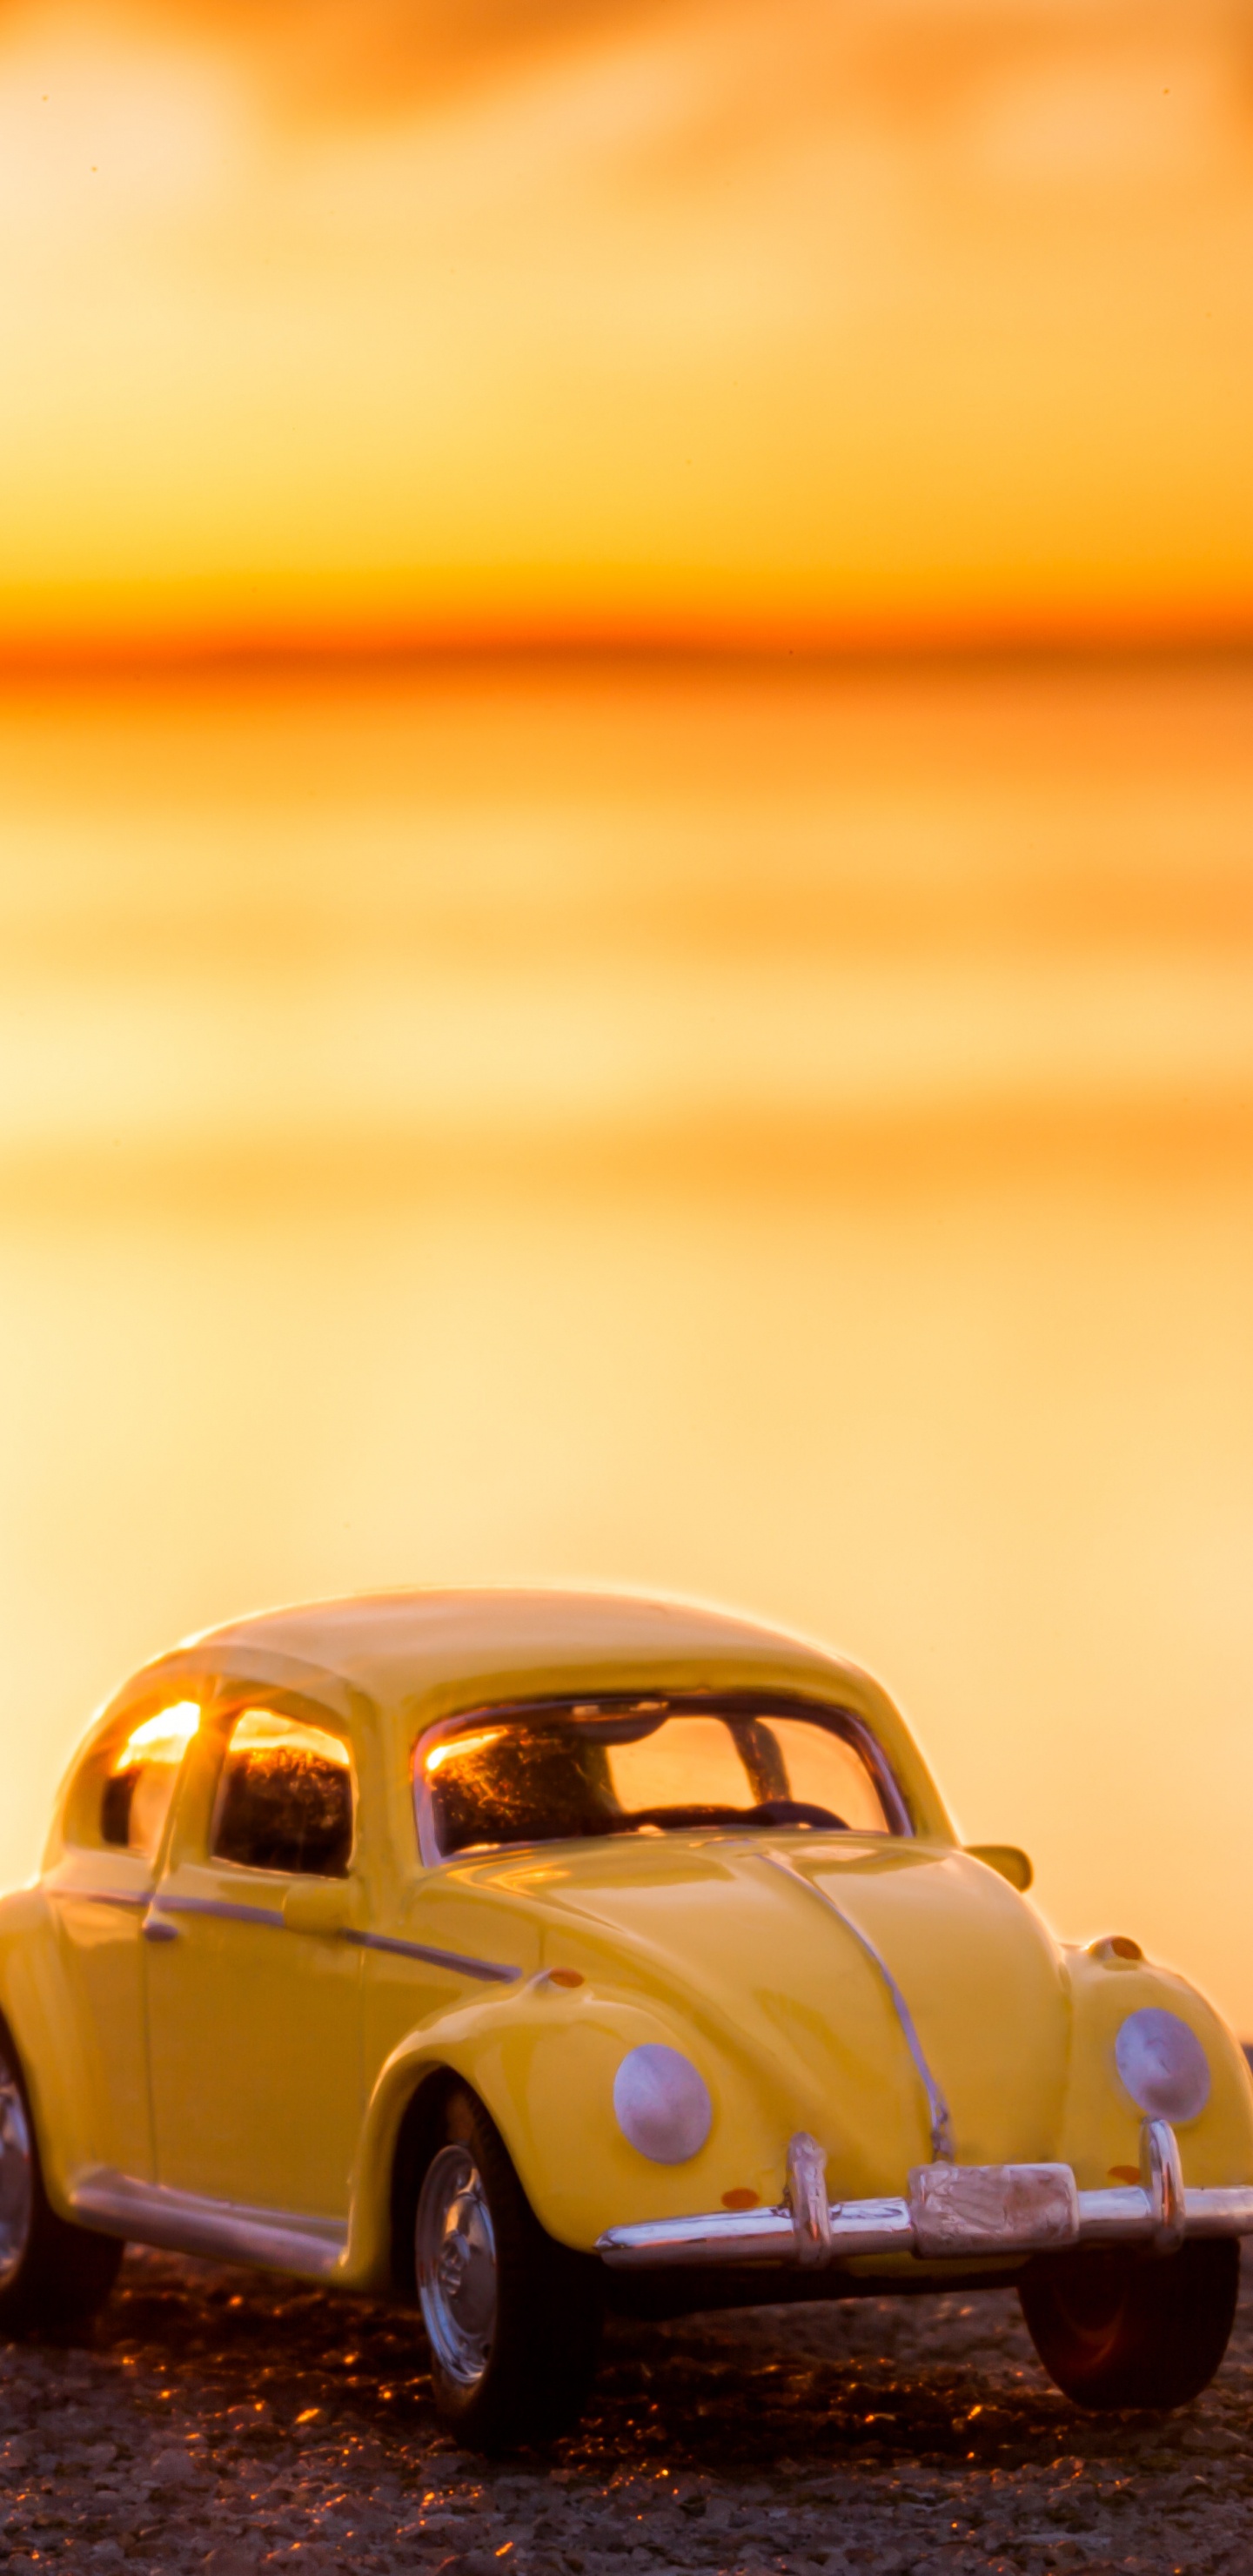 Yellow Volkswagen Beetle on Shore During Sunset. Wallpaper in 1440x2960 Resolution